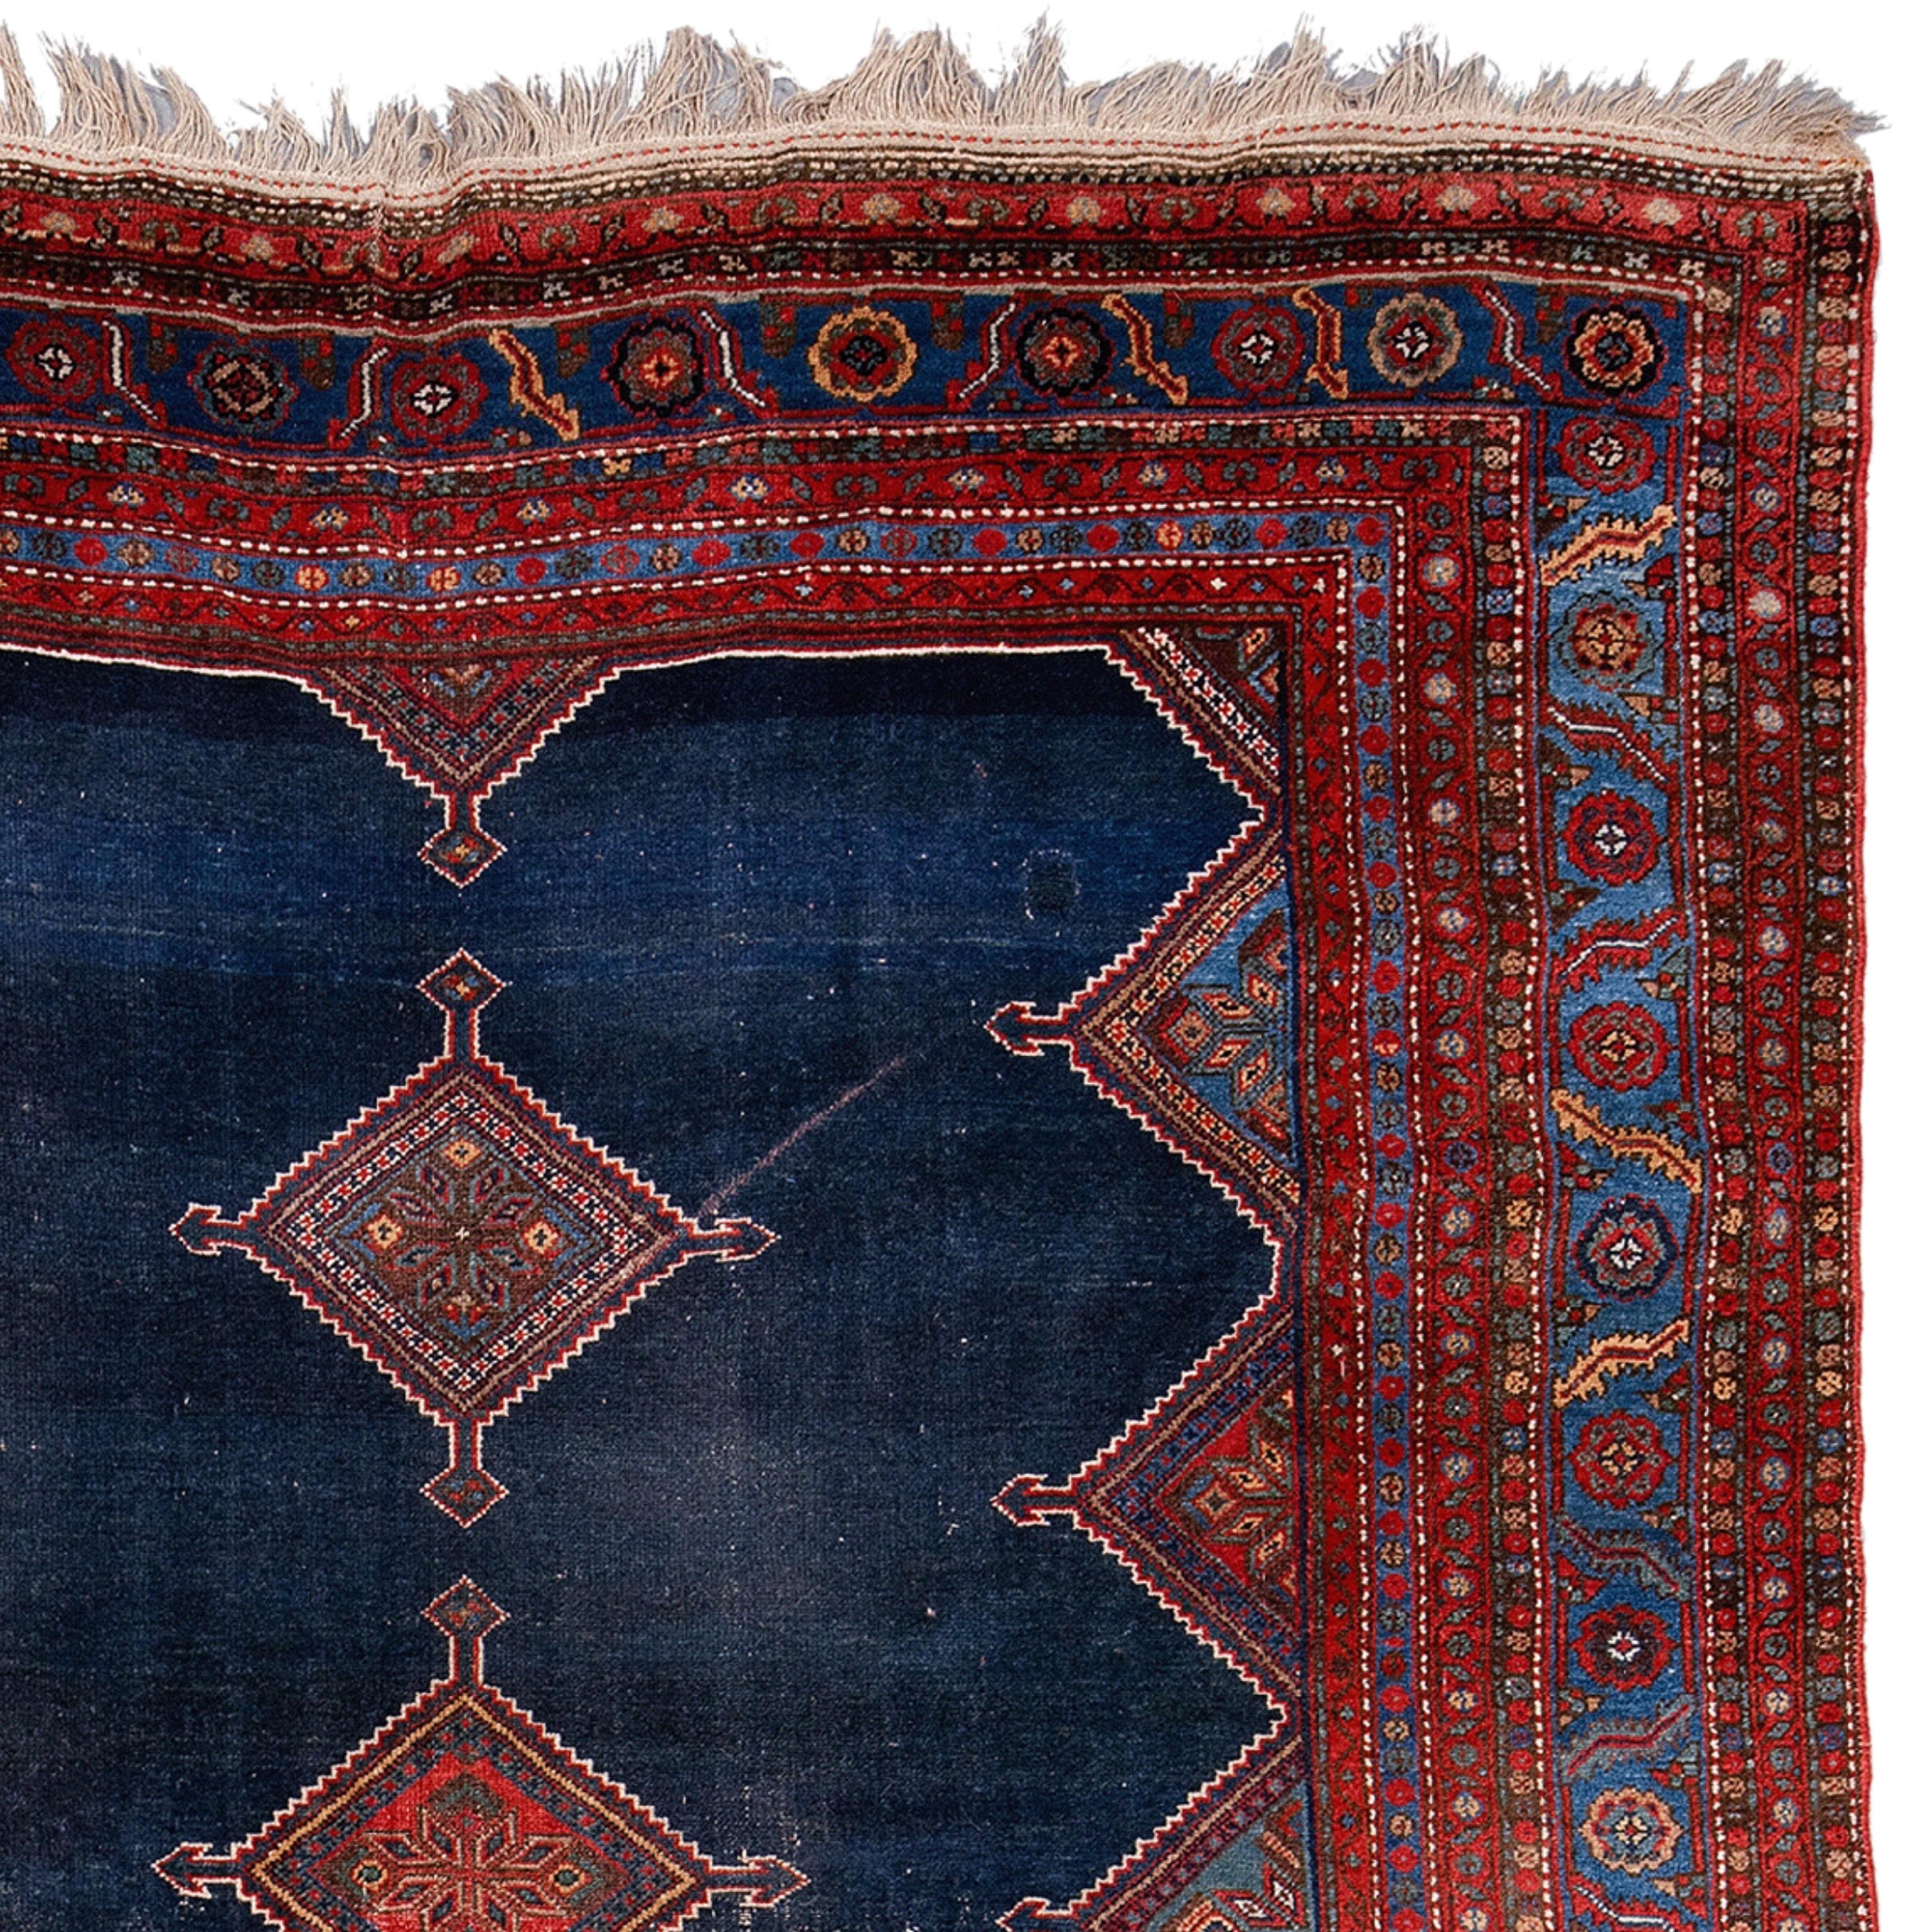 Antique Malayer Rug - 19th Century Malayer Rug, Vintage Rug, Antique Rug In Good Condition For Sale In Sultanahmet, 34